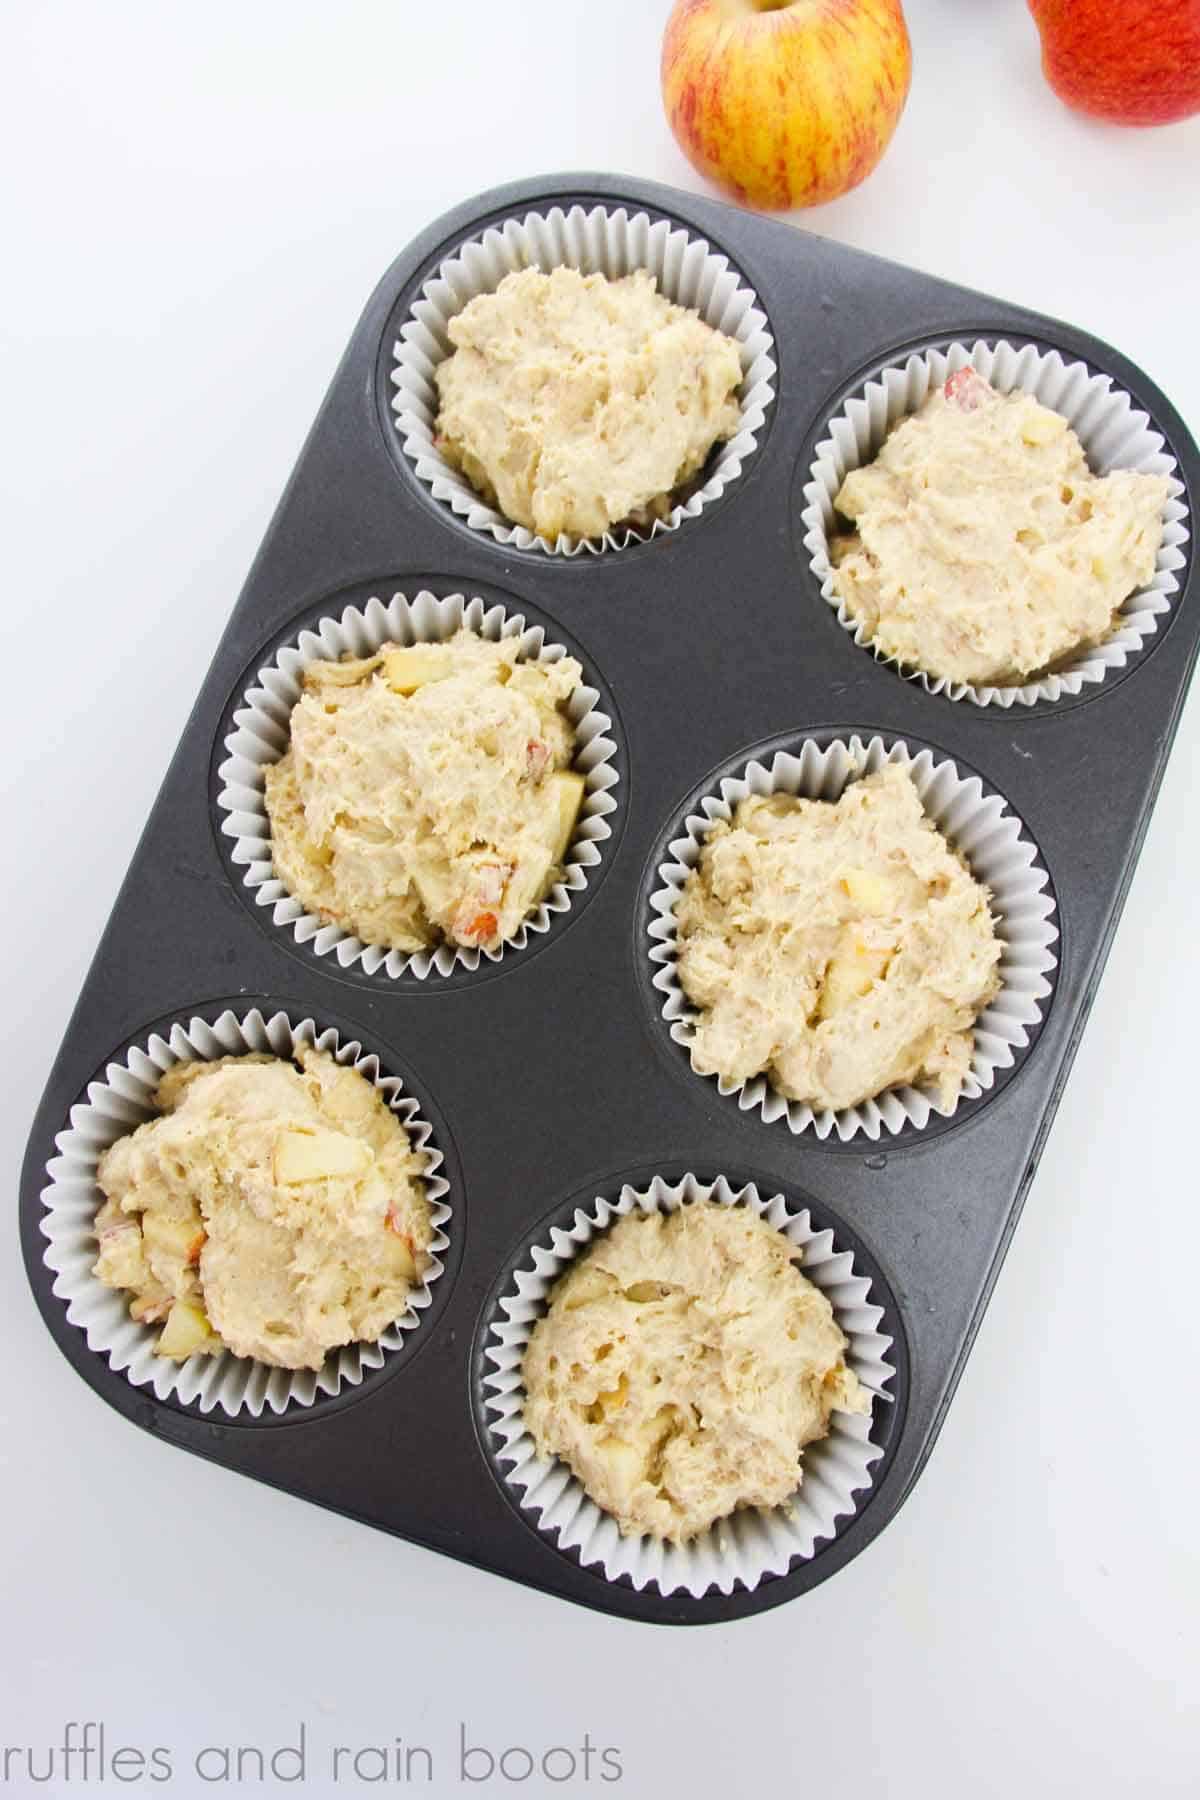 Image with apples and muffin batter in baking cups in a jumbo muffin tin.